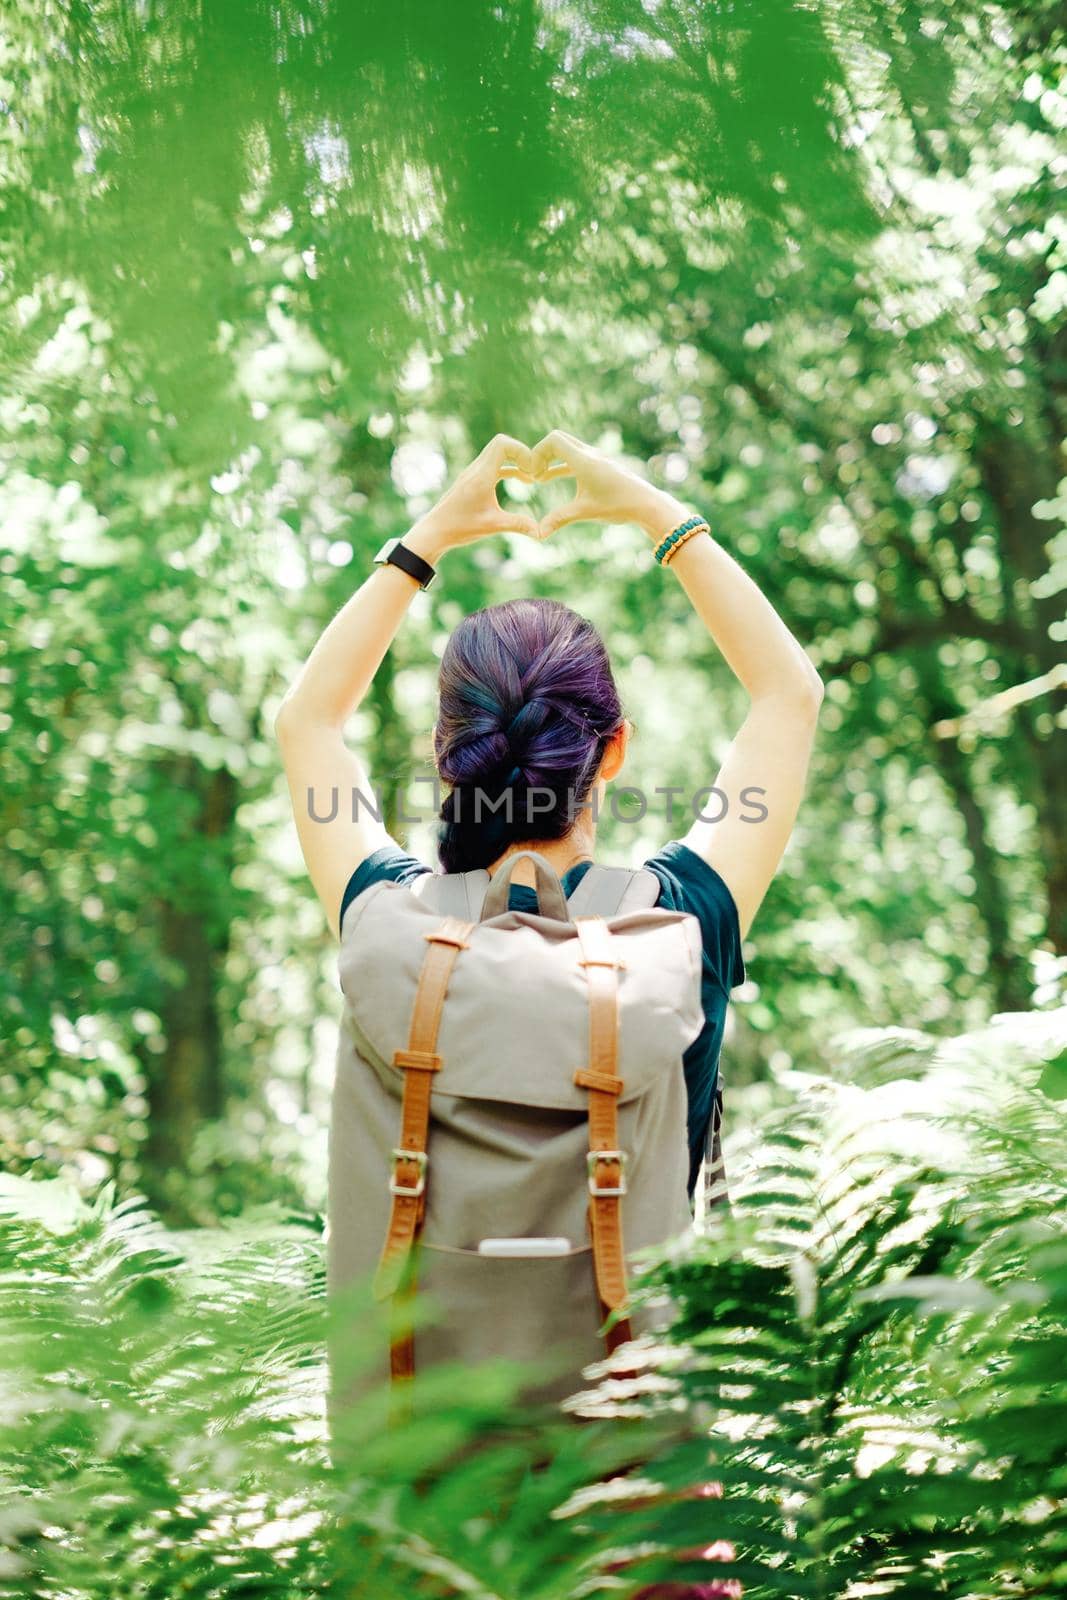 Backpacker young woman standing in summer forest and making heart shape with her hands.